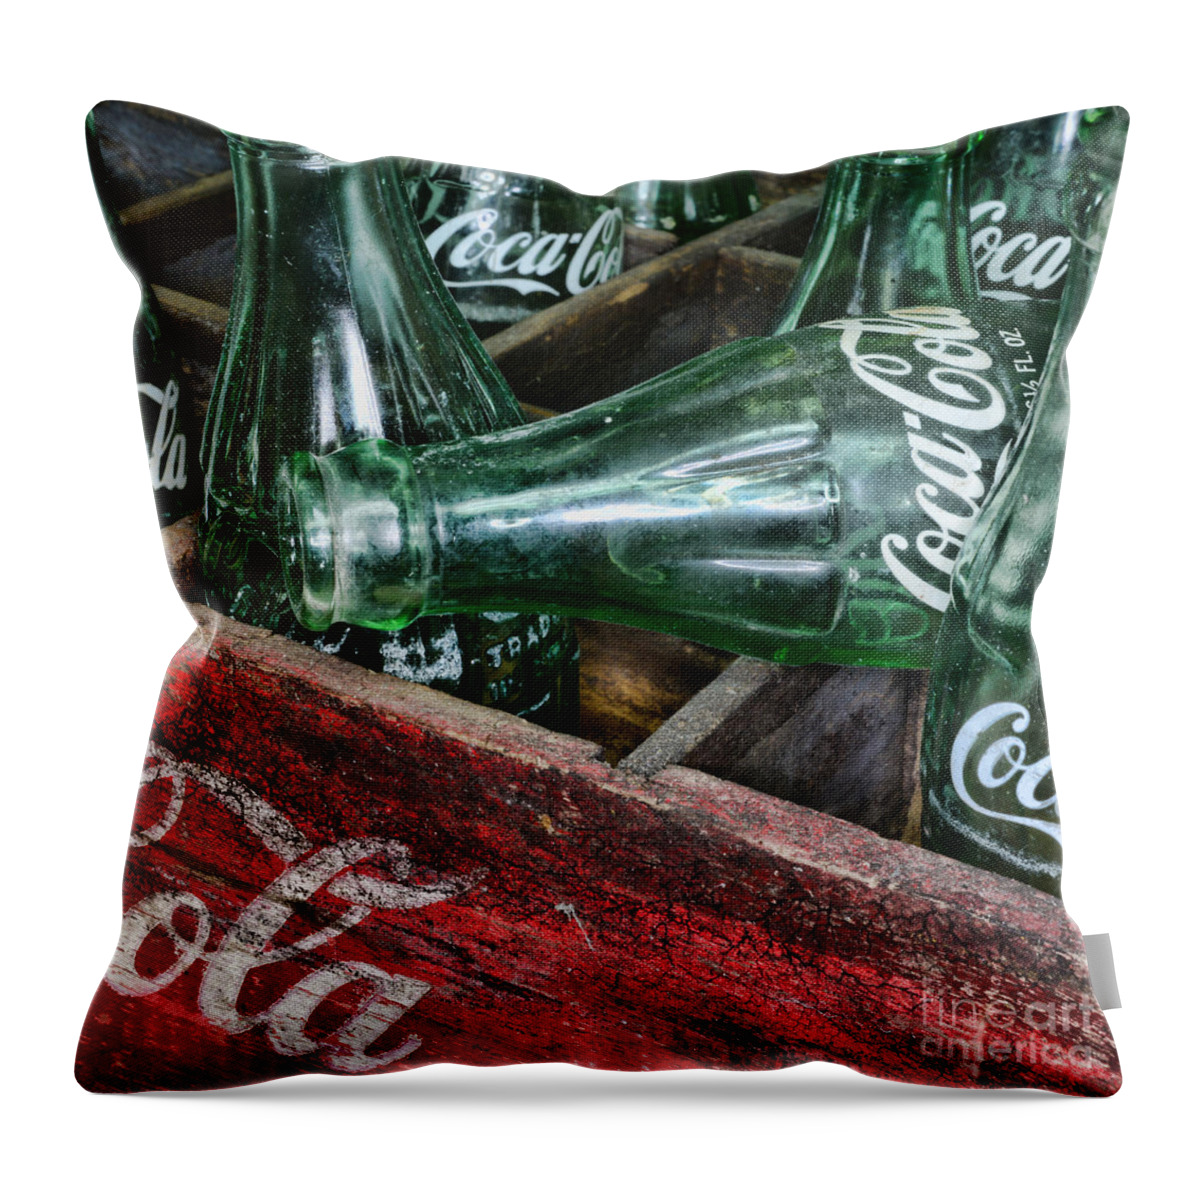 Coke Throw Pillow featuring the photograph Vintage Coke Square Format by Paul Ward